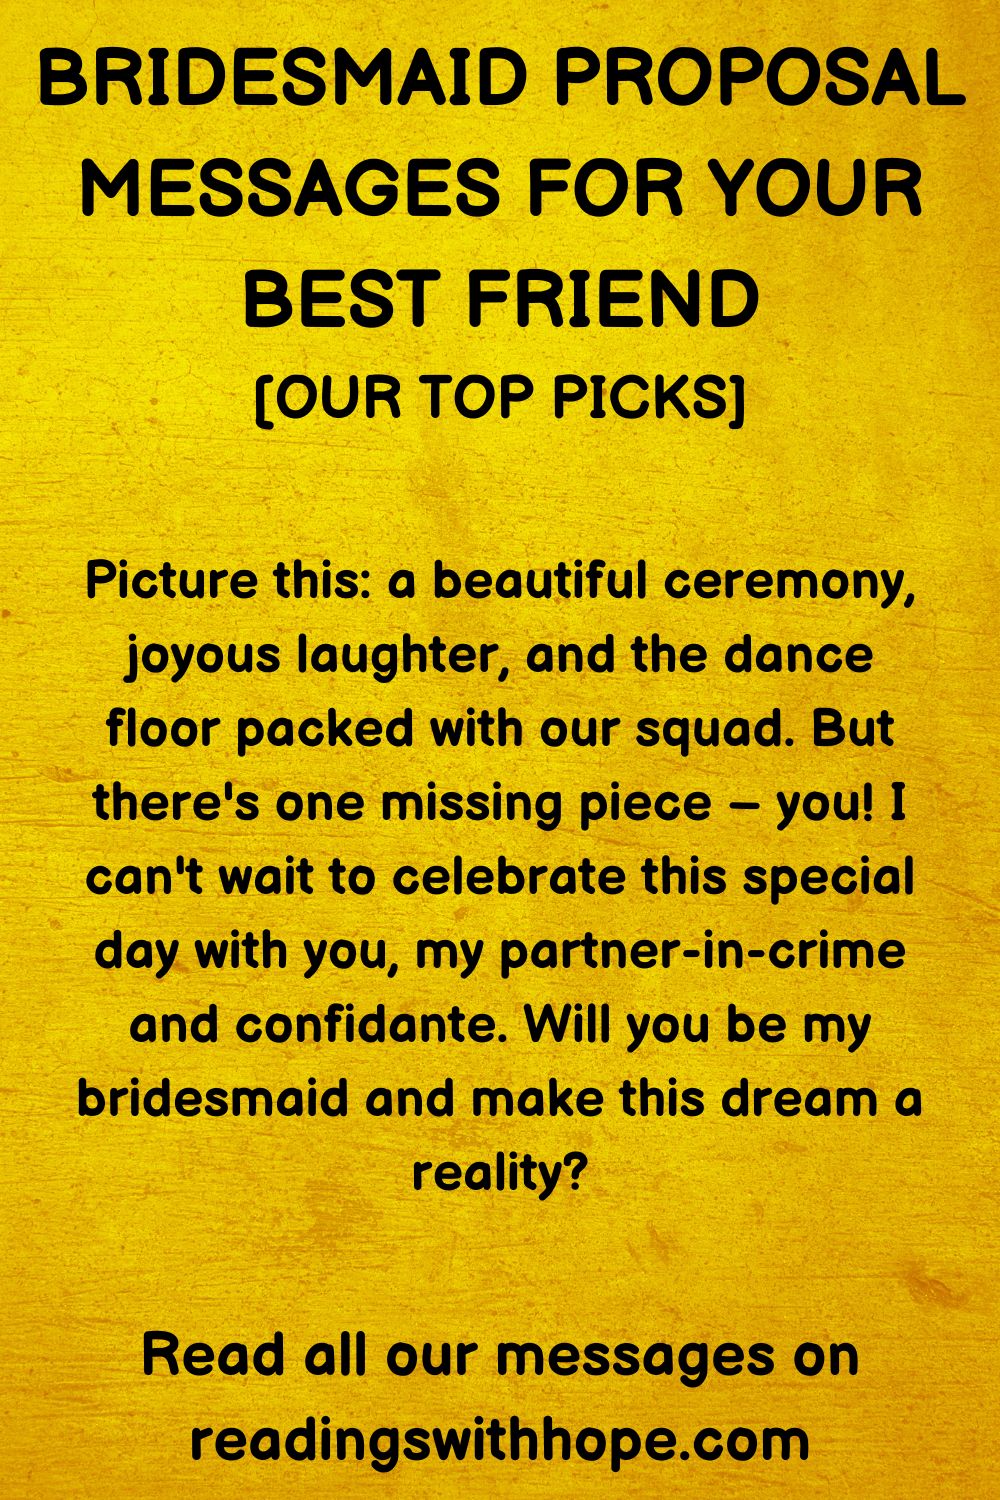 Bridesmaid Proposal Message for Best Friend